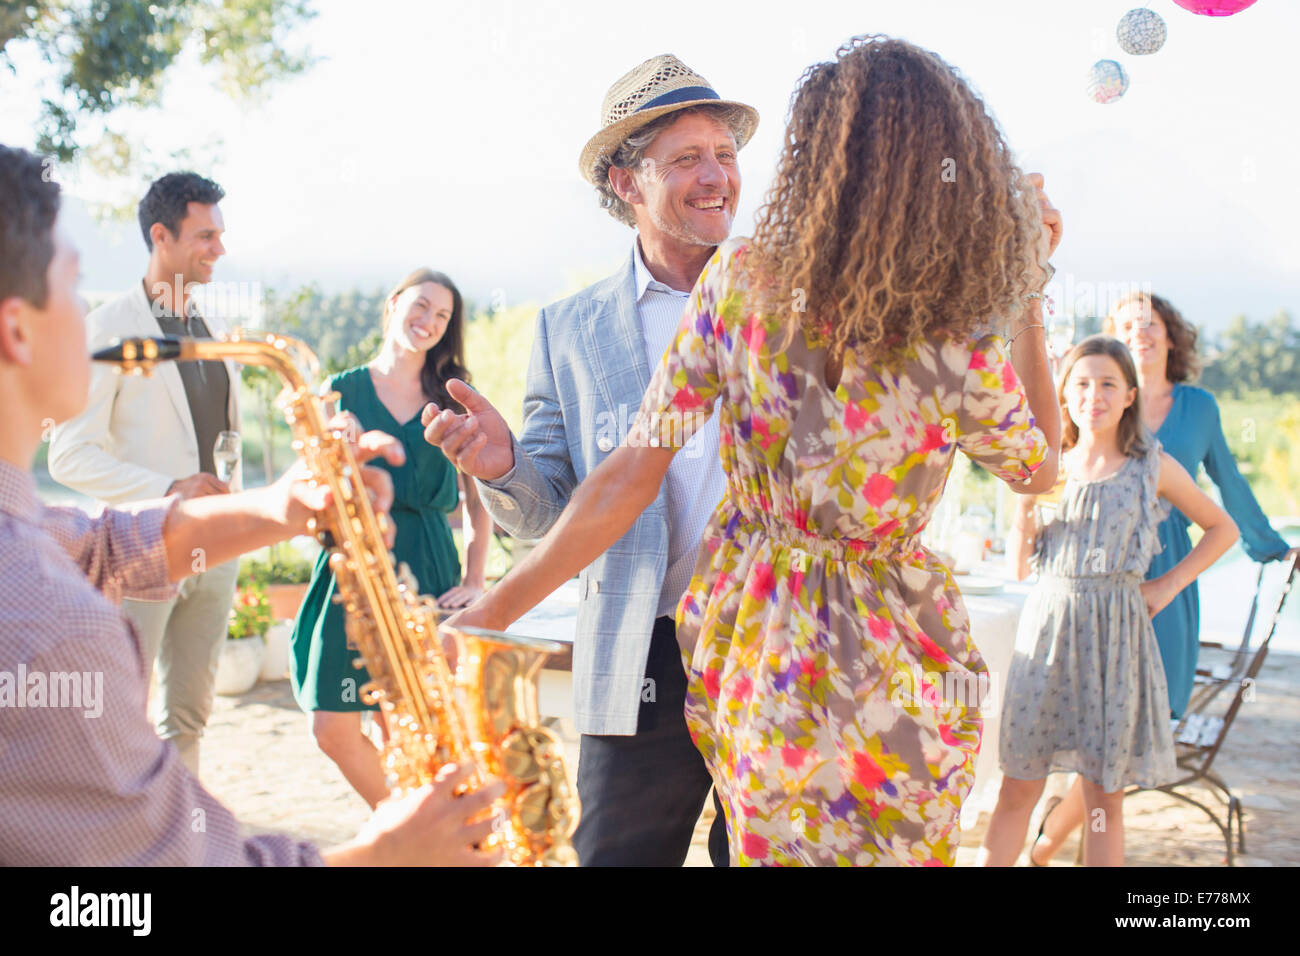 Father and daughter dancing together Stock Photo